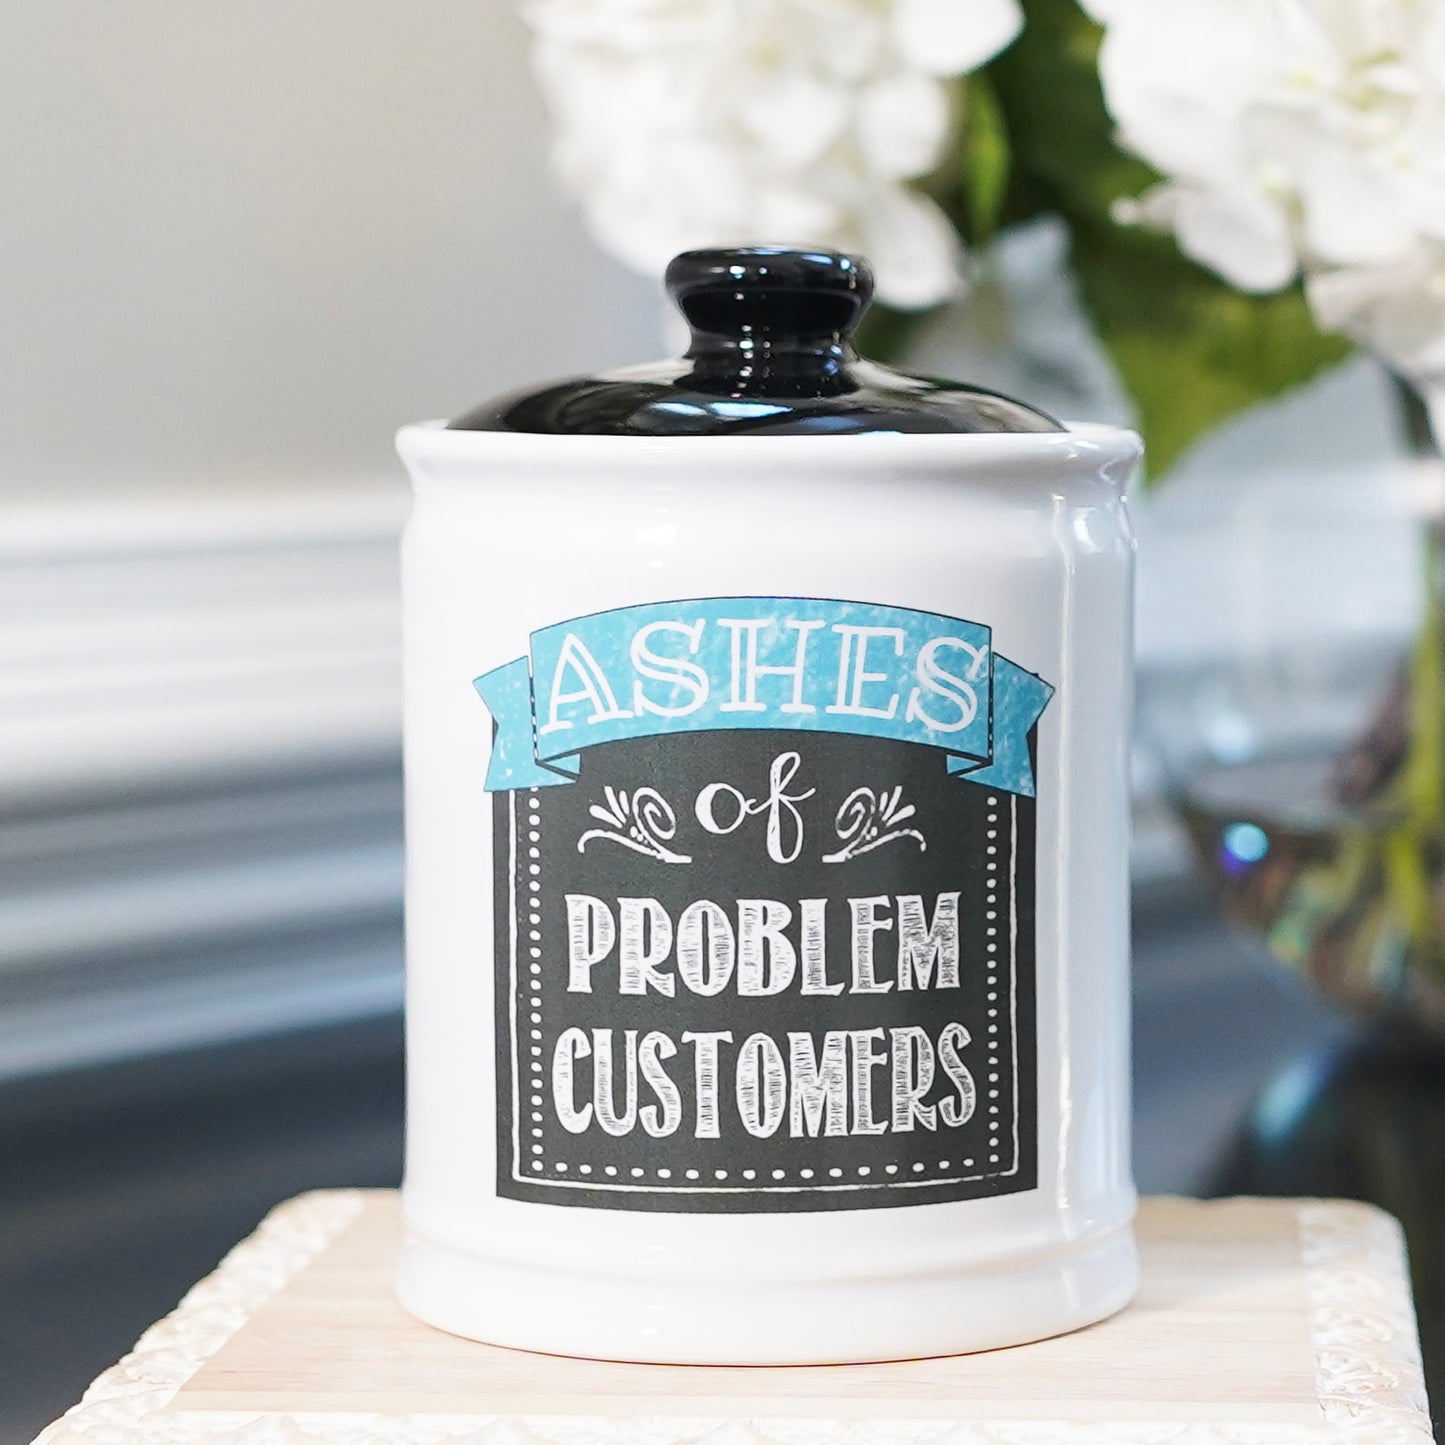 Cottage Creek Ashes of Problem Customers Piggy Bank, Multicolored, Ceramic, 6", Office Candy Jar, Boss Gifts